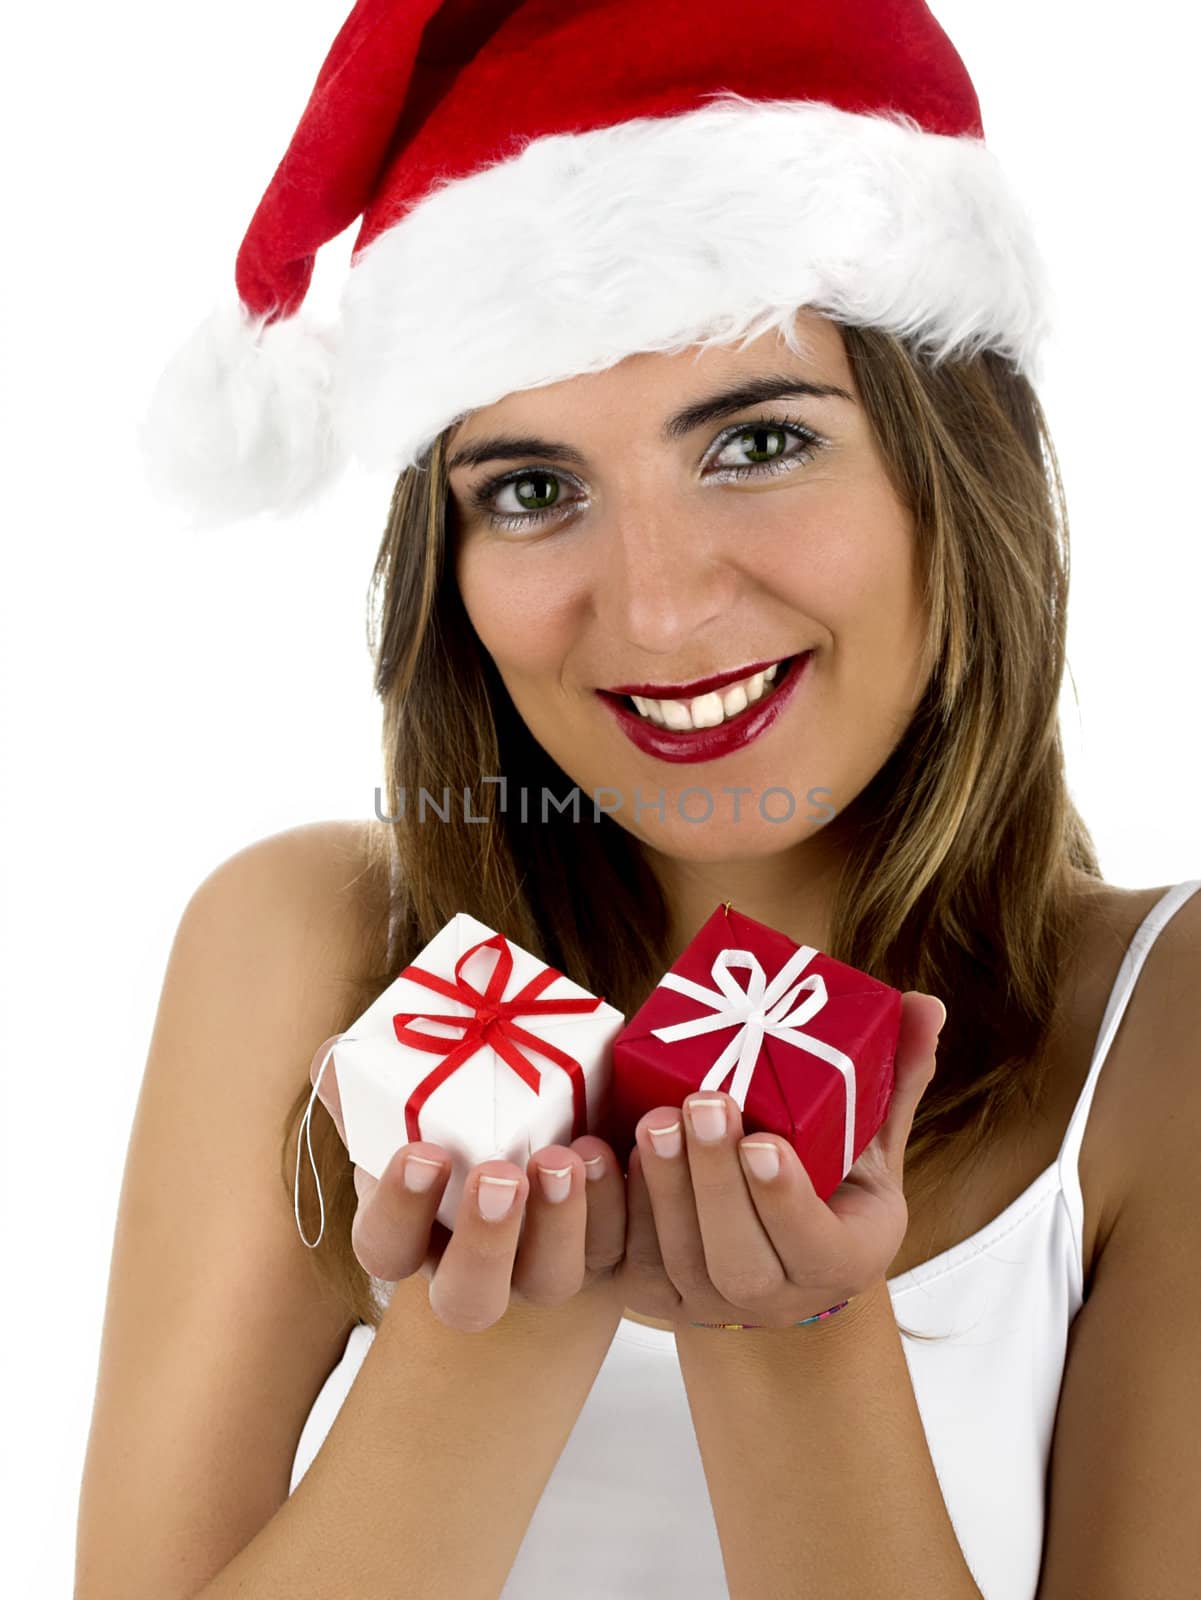 Christmas season! Different poses of a beautiful woman with small gifts on the hands. (Focus is especially on the gifts)